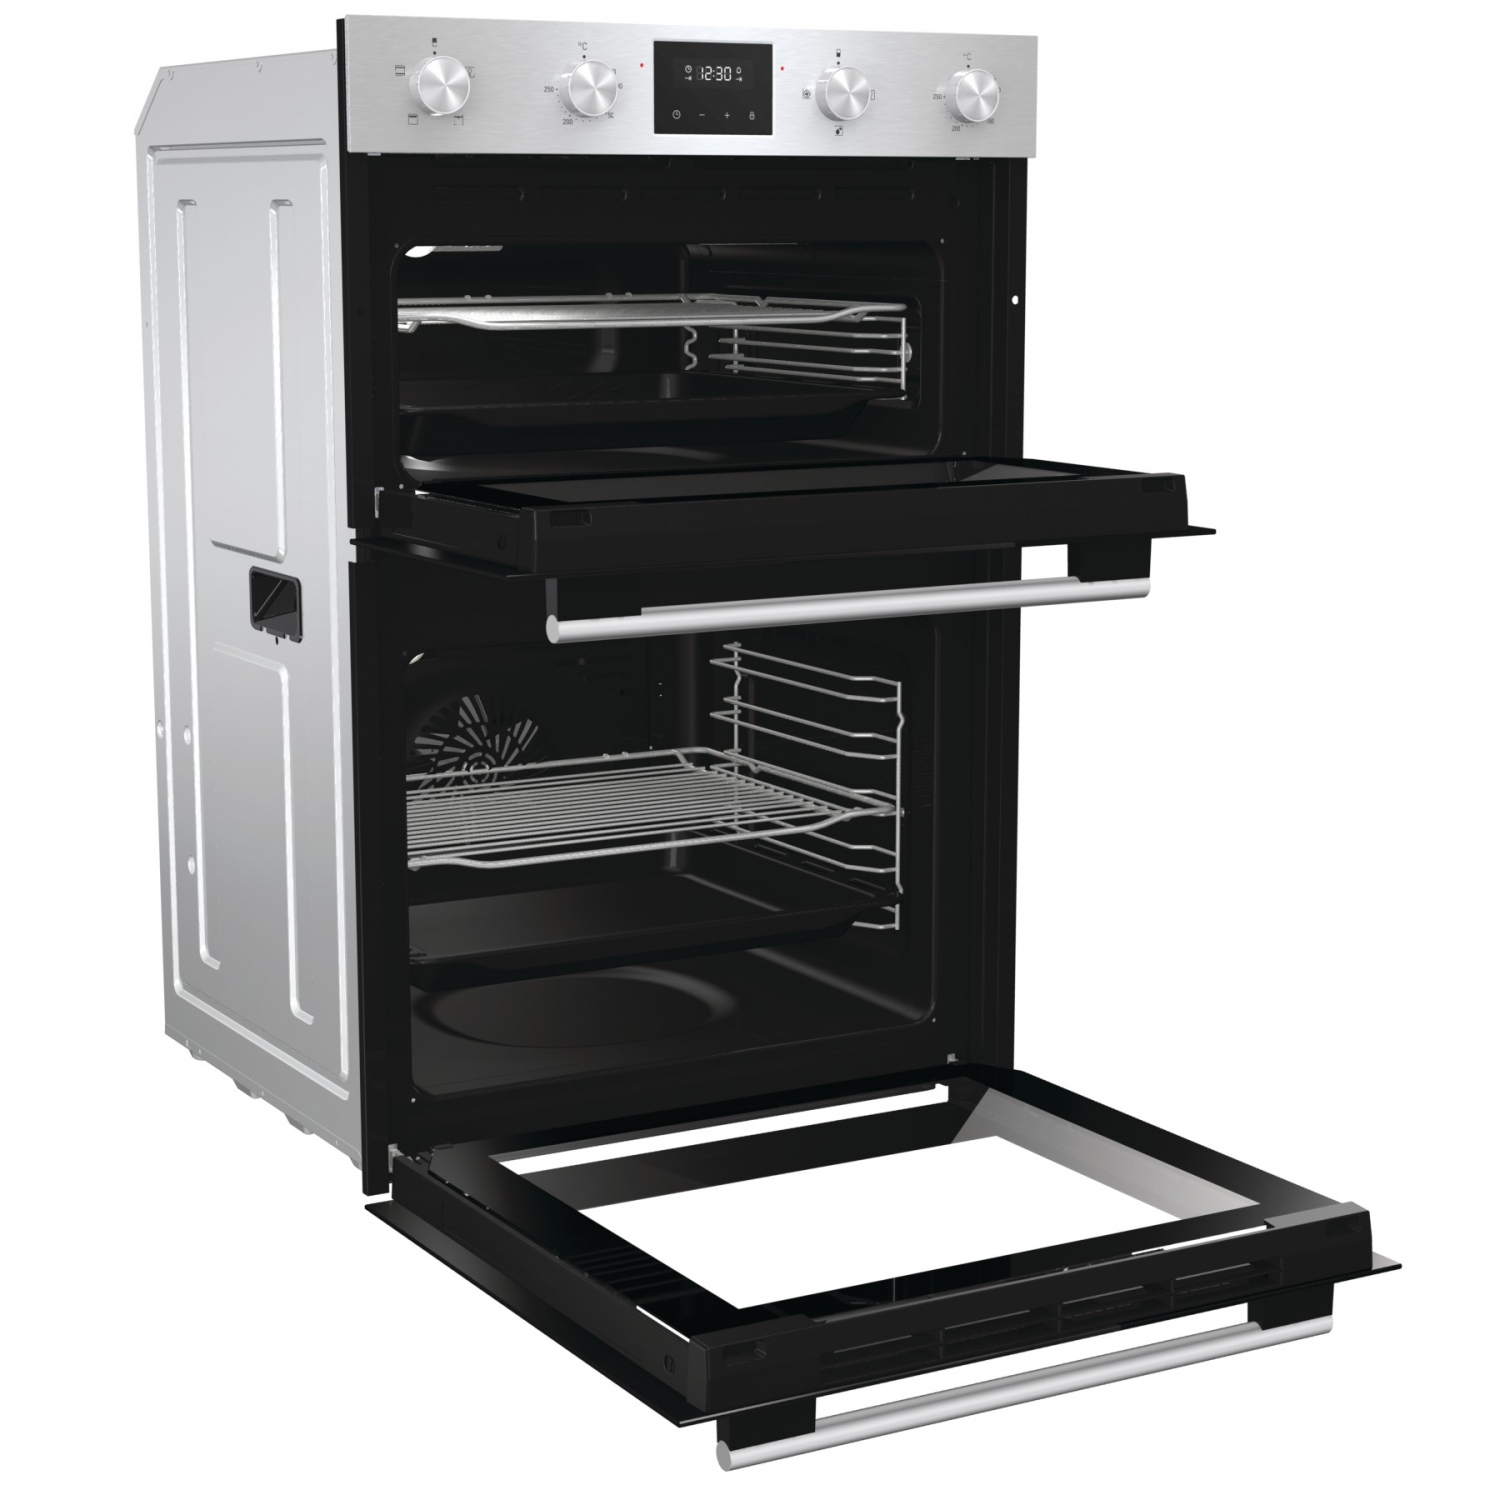 Hisense BID95211XUK 59.4cm Built In Electric Double Oven - Stainless Steel - 2